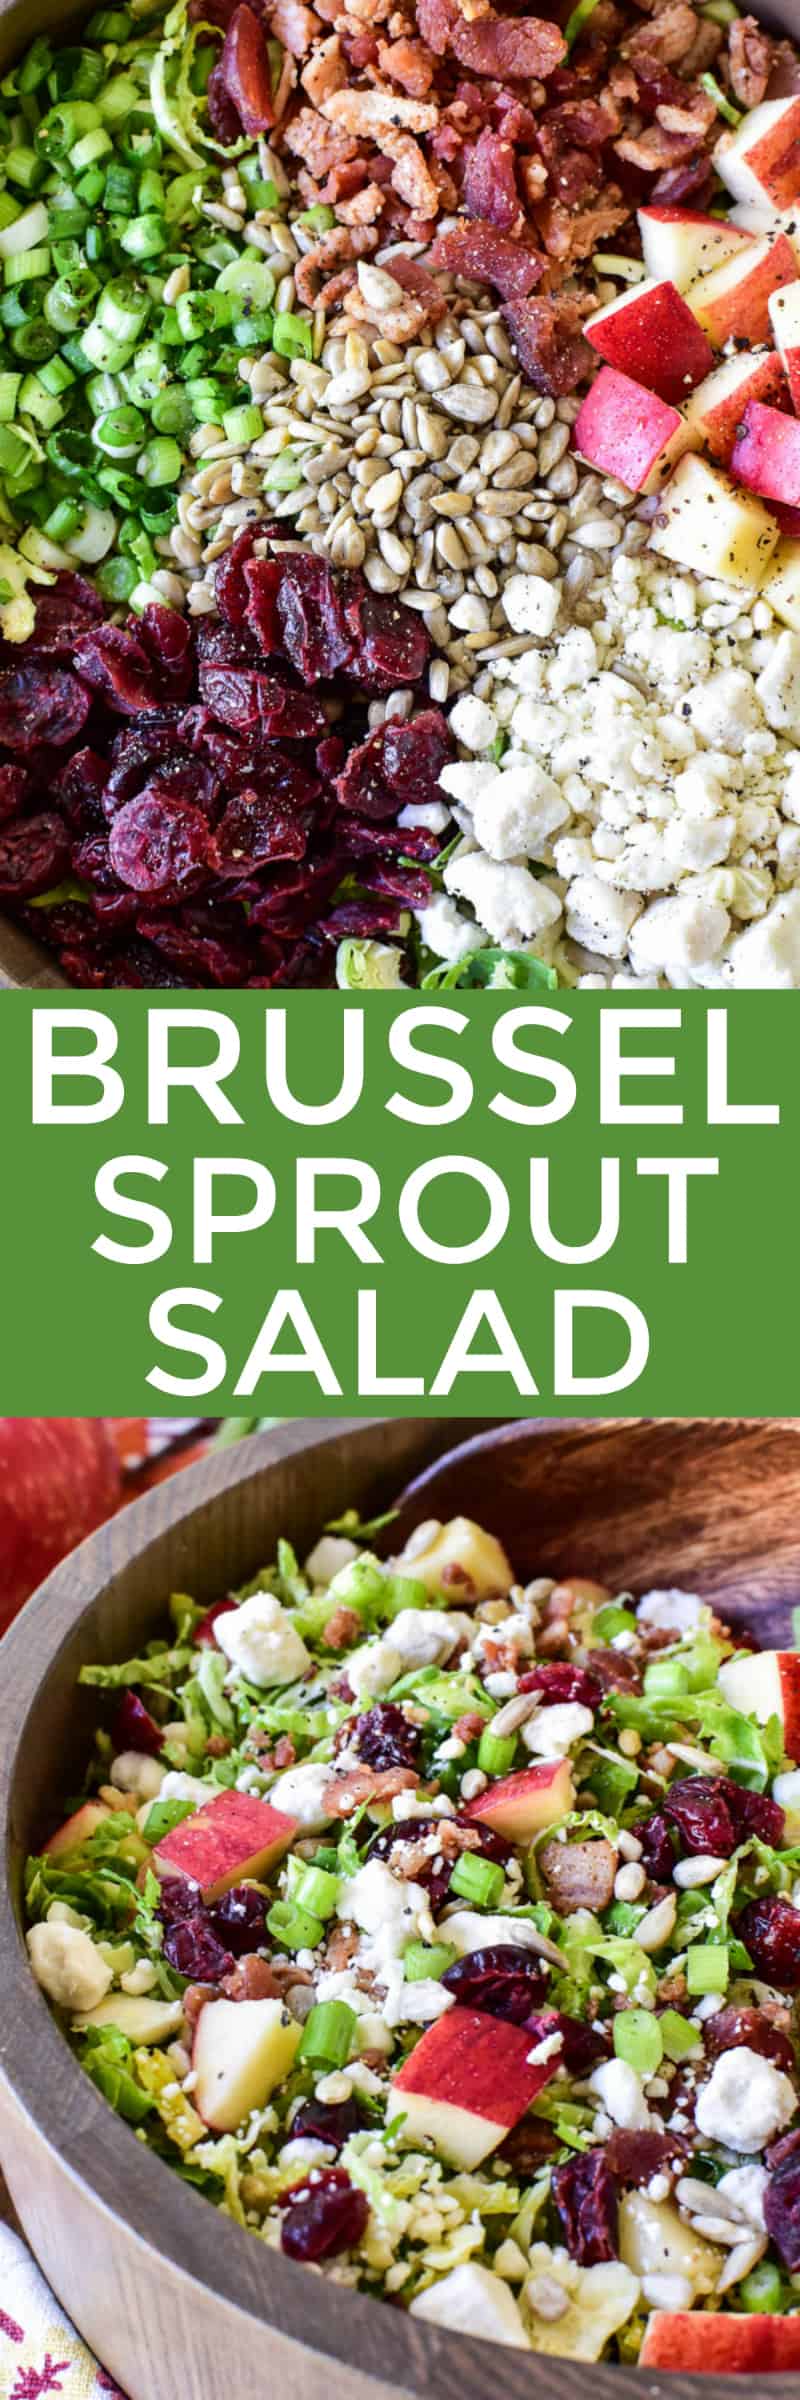 Collage image of Brussel Sprout Salad & ingredients 